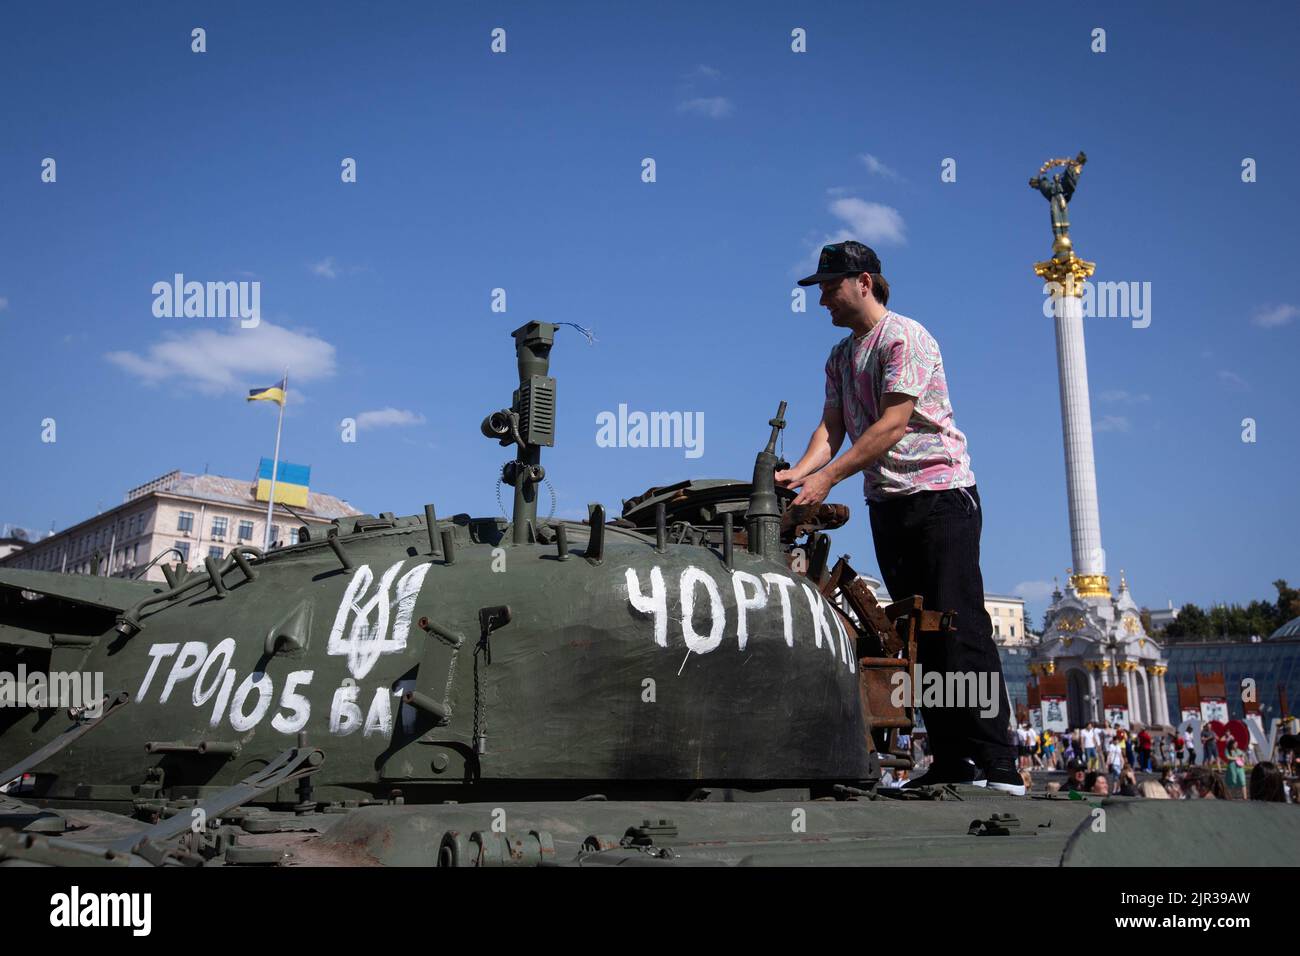 A man looks at a destroyed Russian tank displayed on the main street Khreshchatyk as part of the upcoming celebration of the Independence Day of Ukraine amid Russia's invasion of Ukraine in central Kyiv. Stock Photo